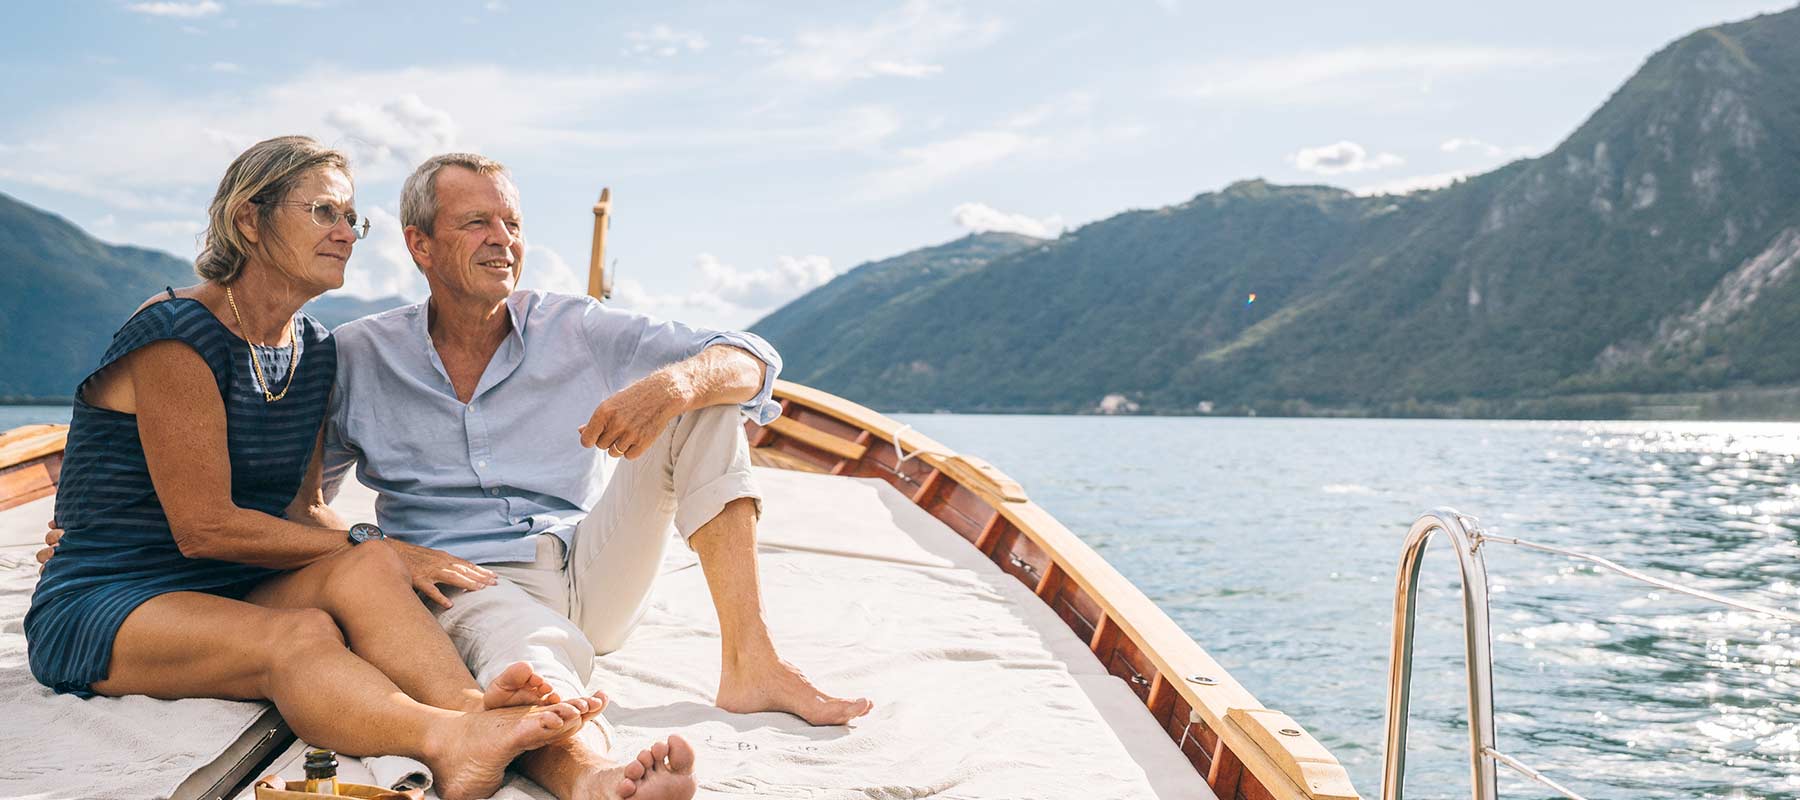 A senior couple enjoys a stunning view on a boat